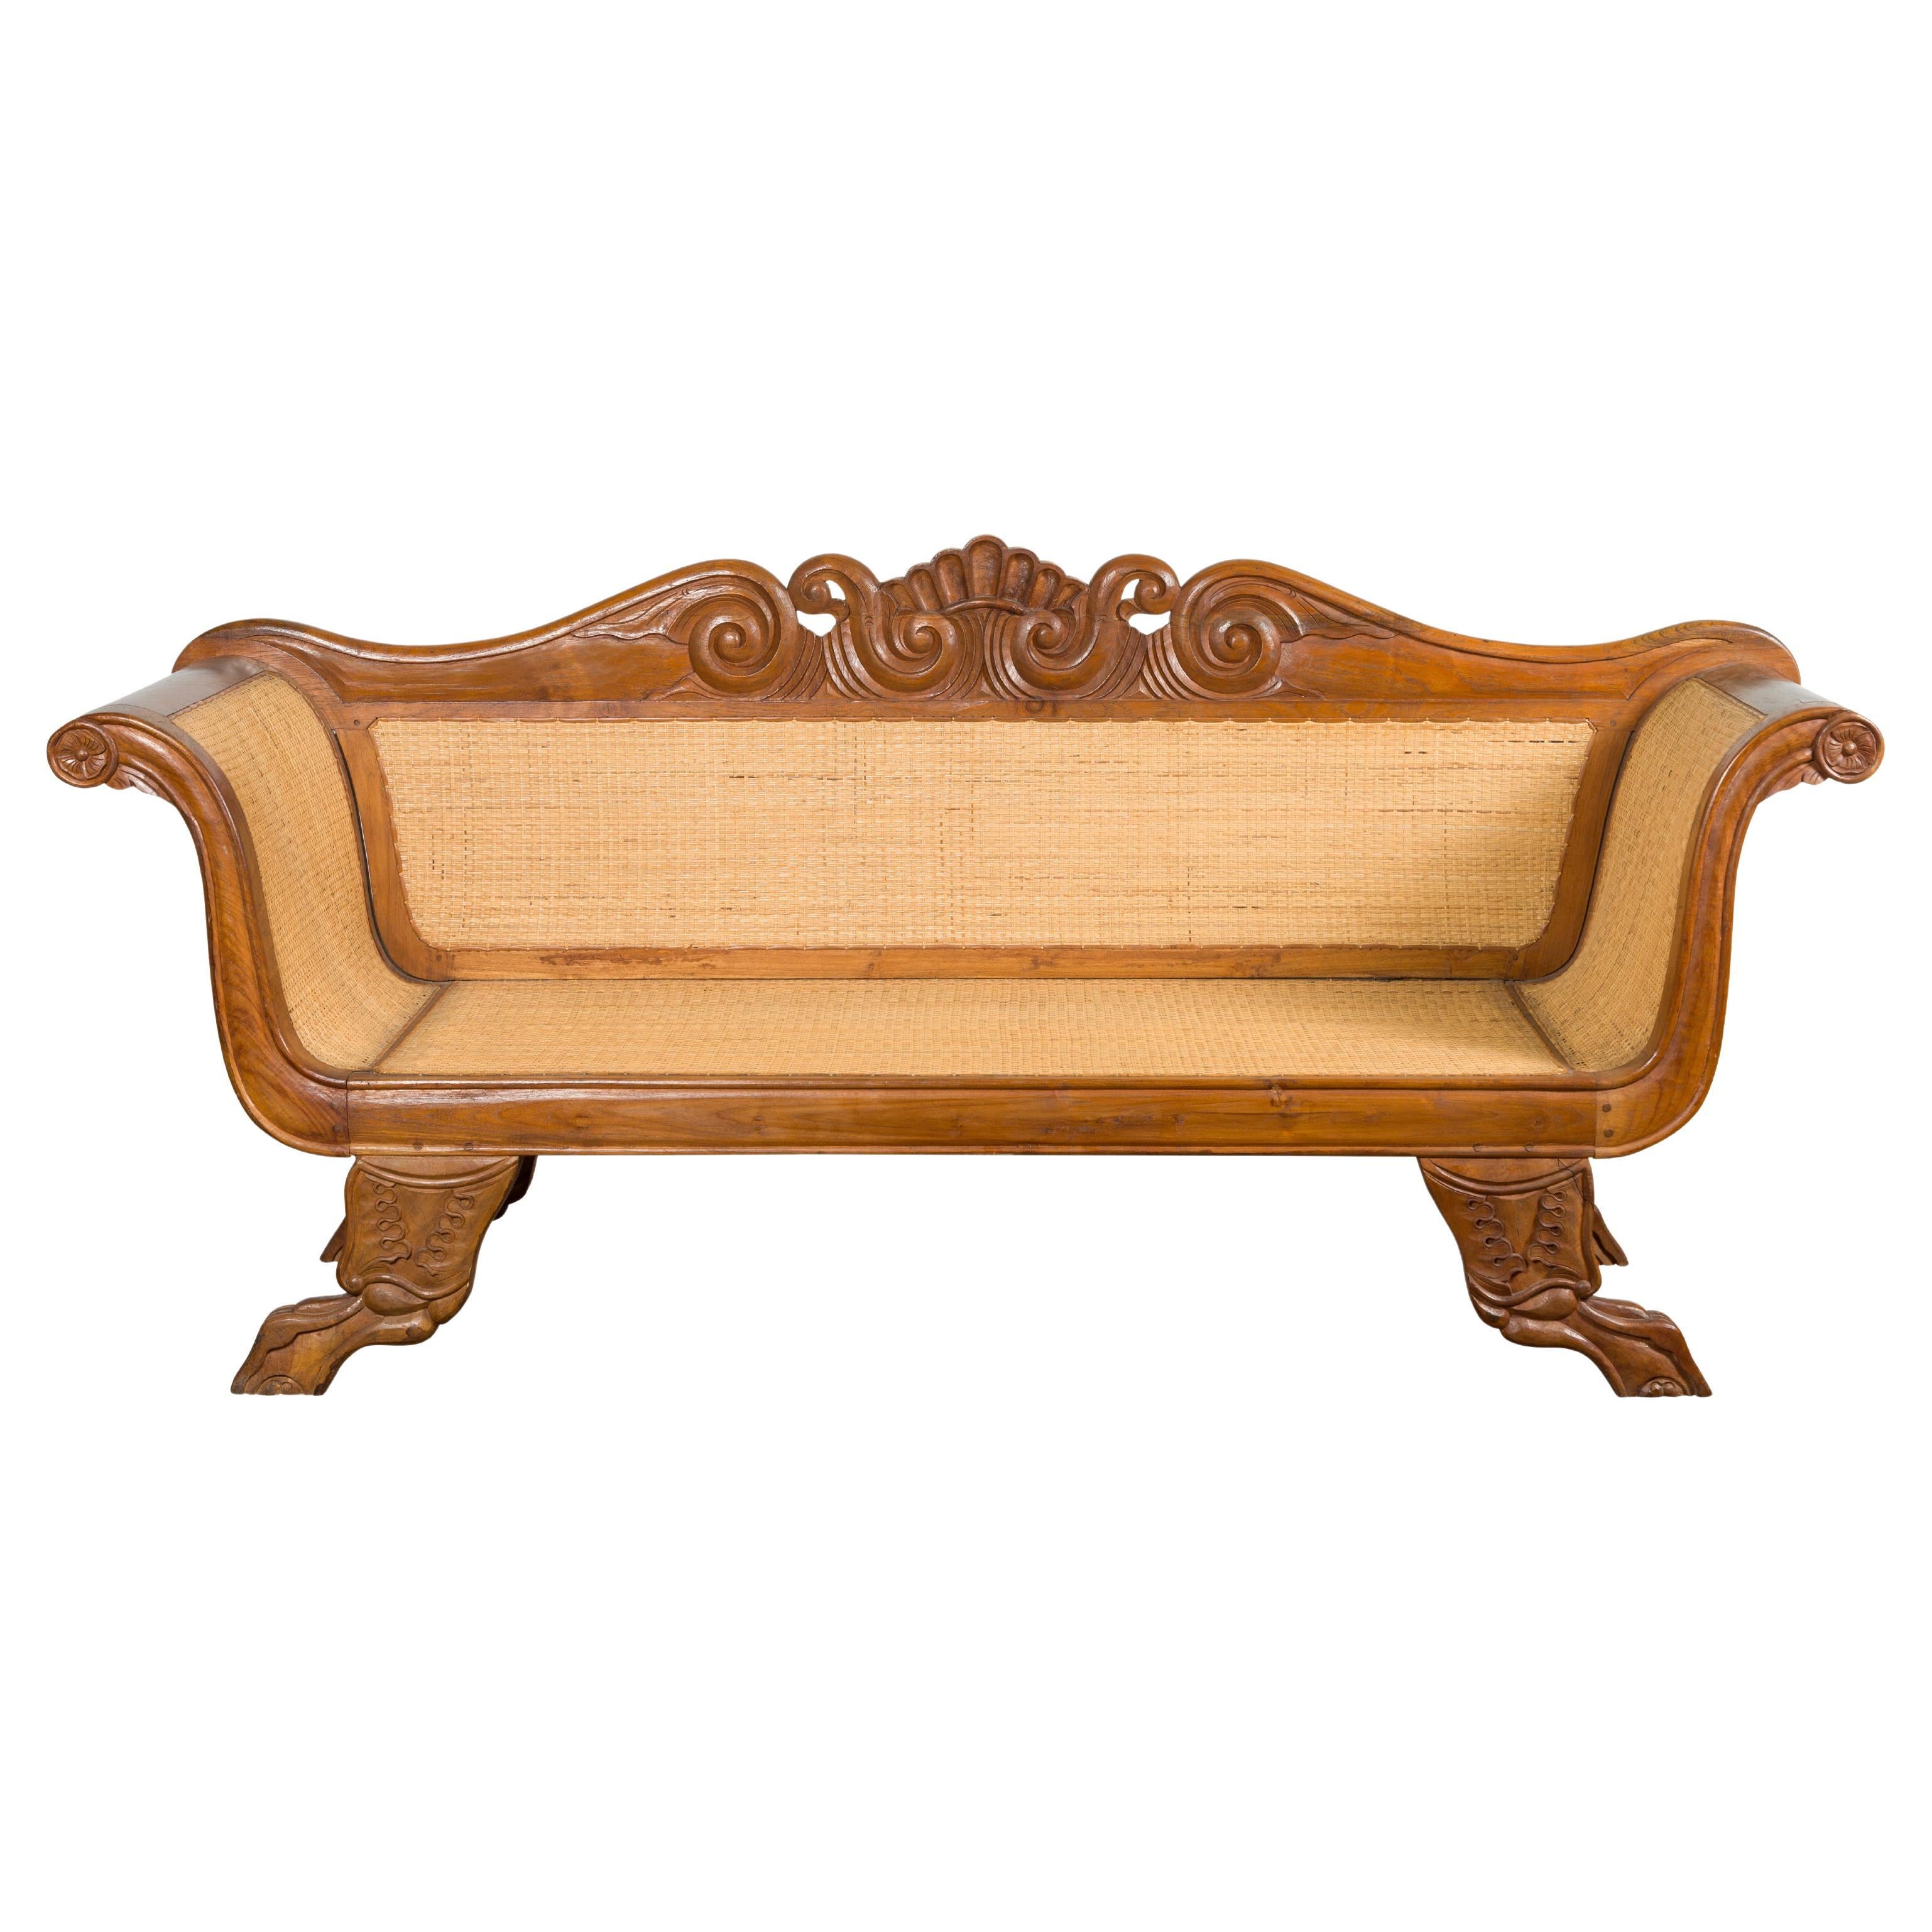 Dutch Colonial Javanese Teak Settee with Carved Décor and Inset Woven Rattan